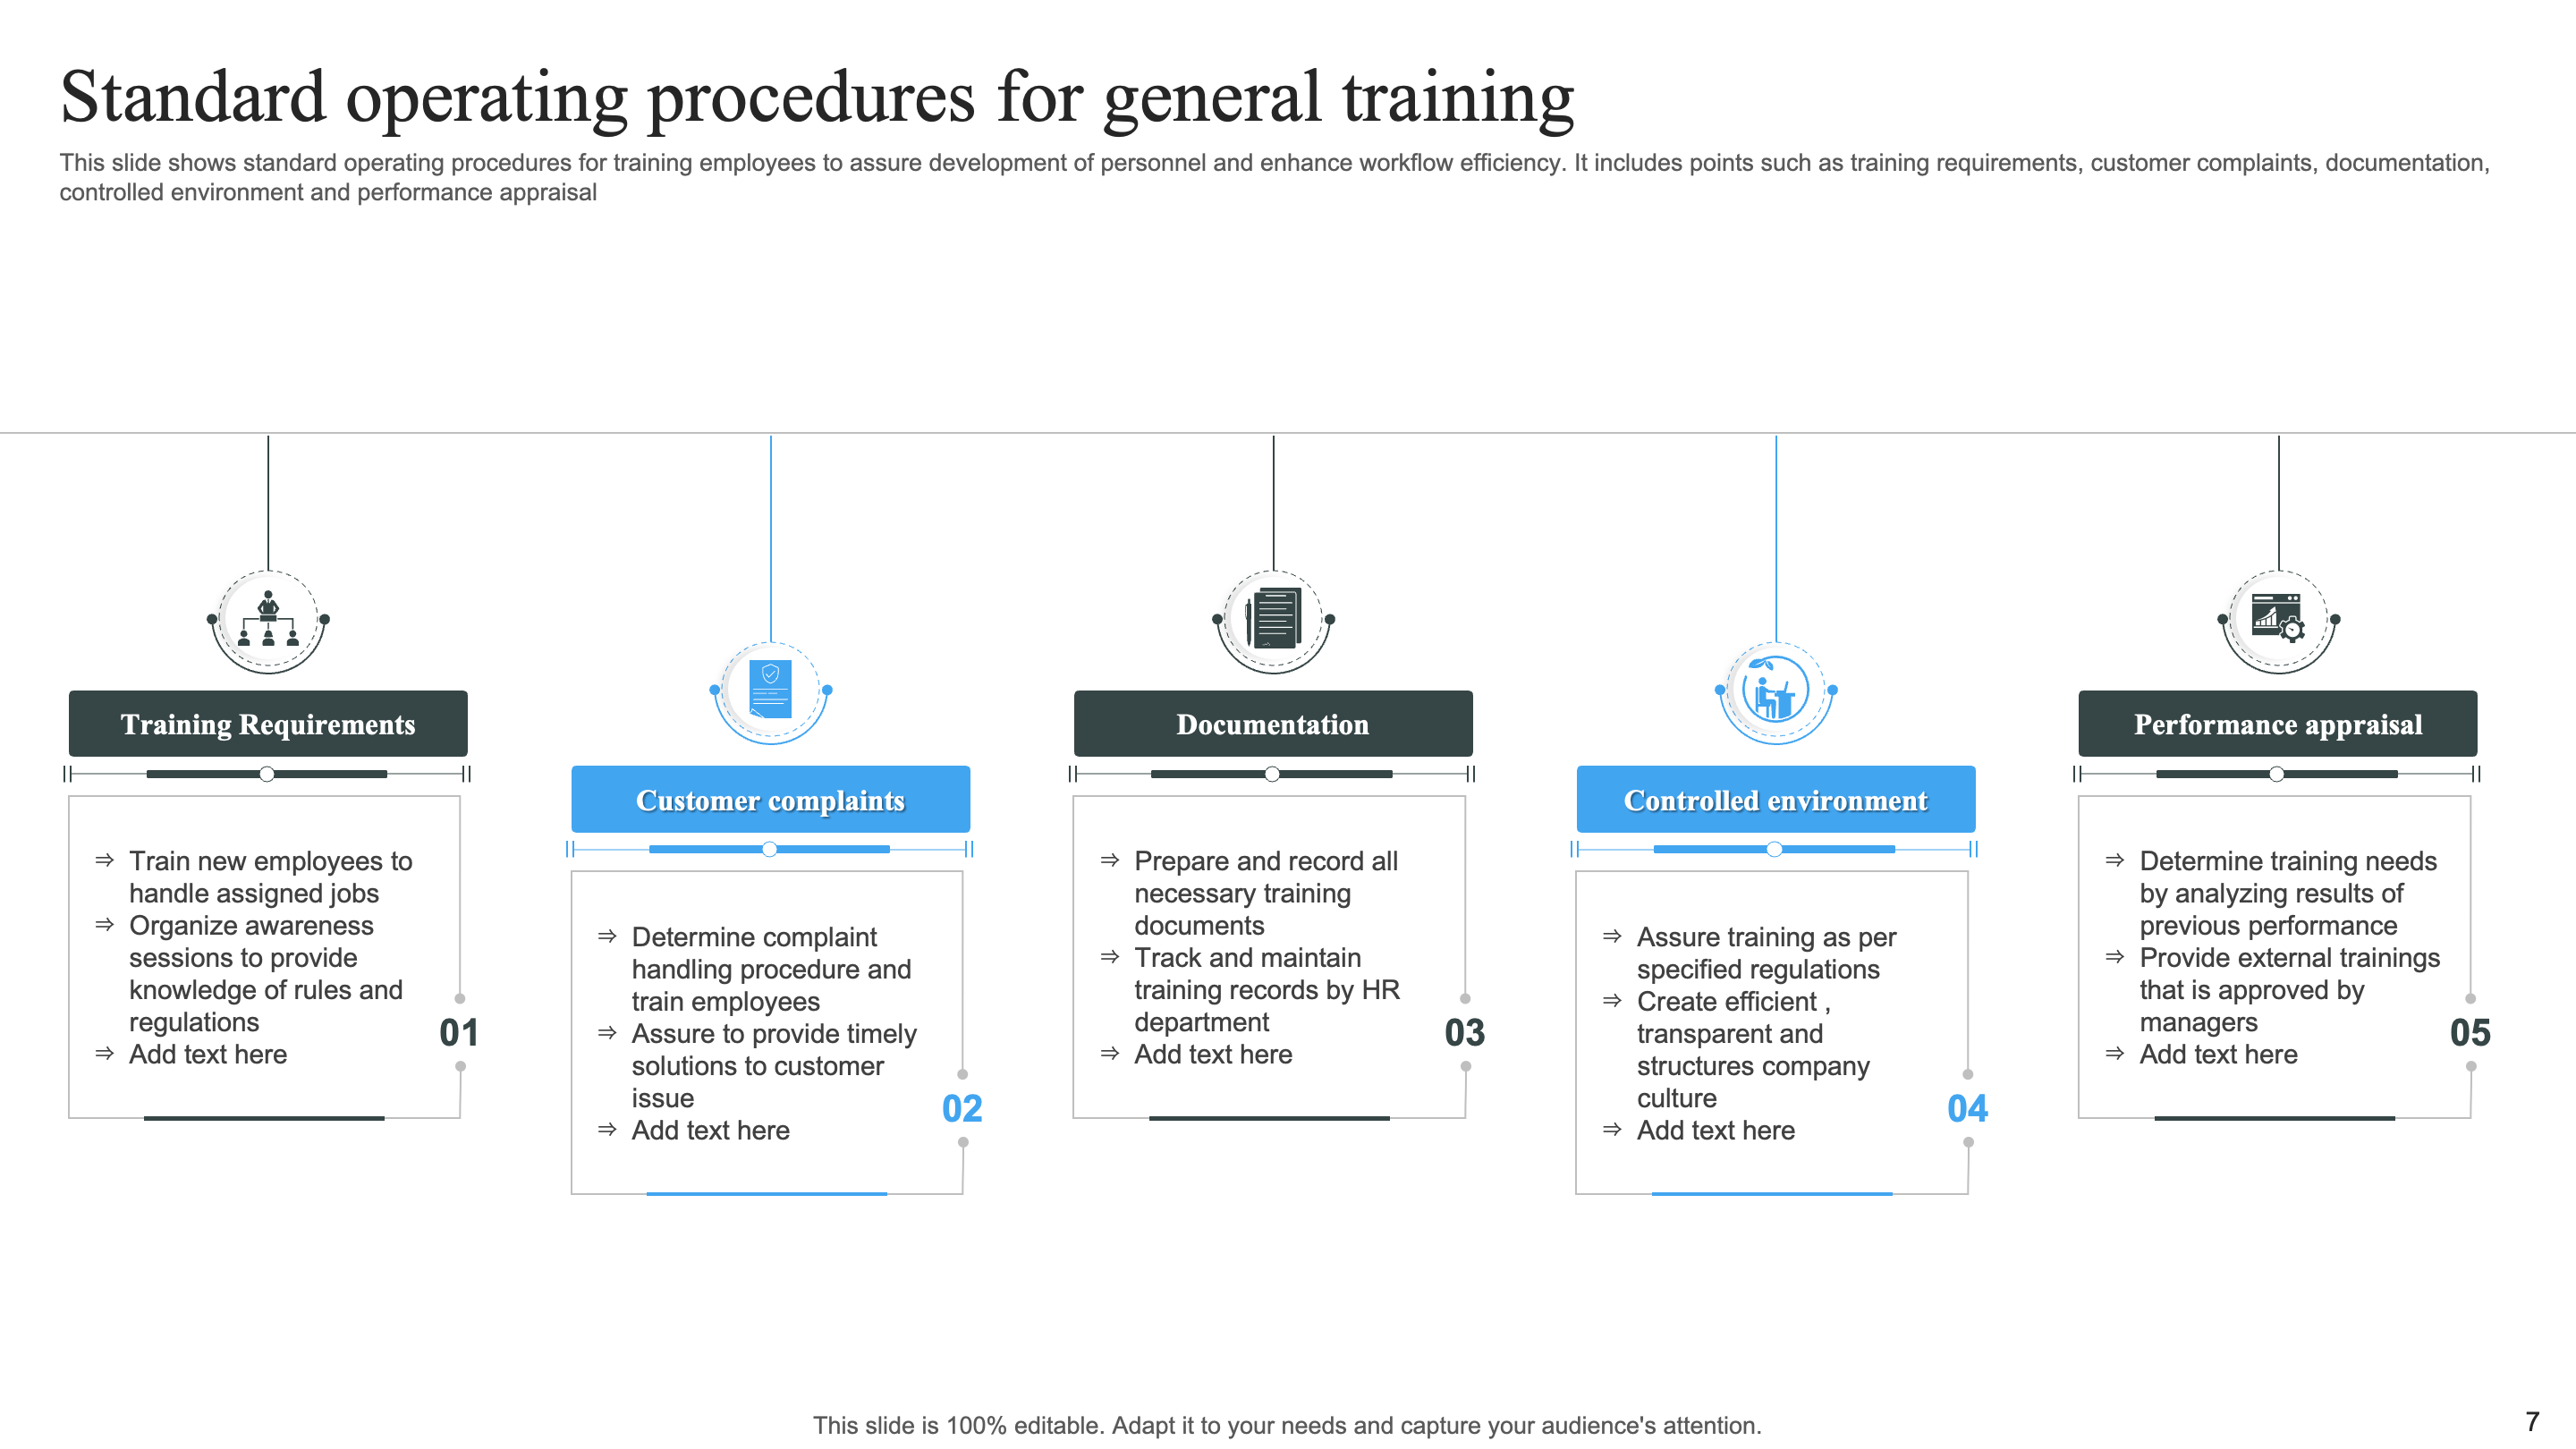 Standard Operating Procedures for General Training